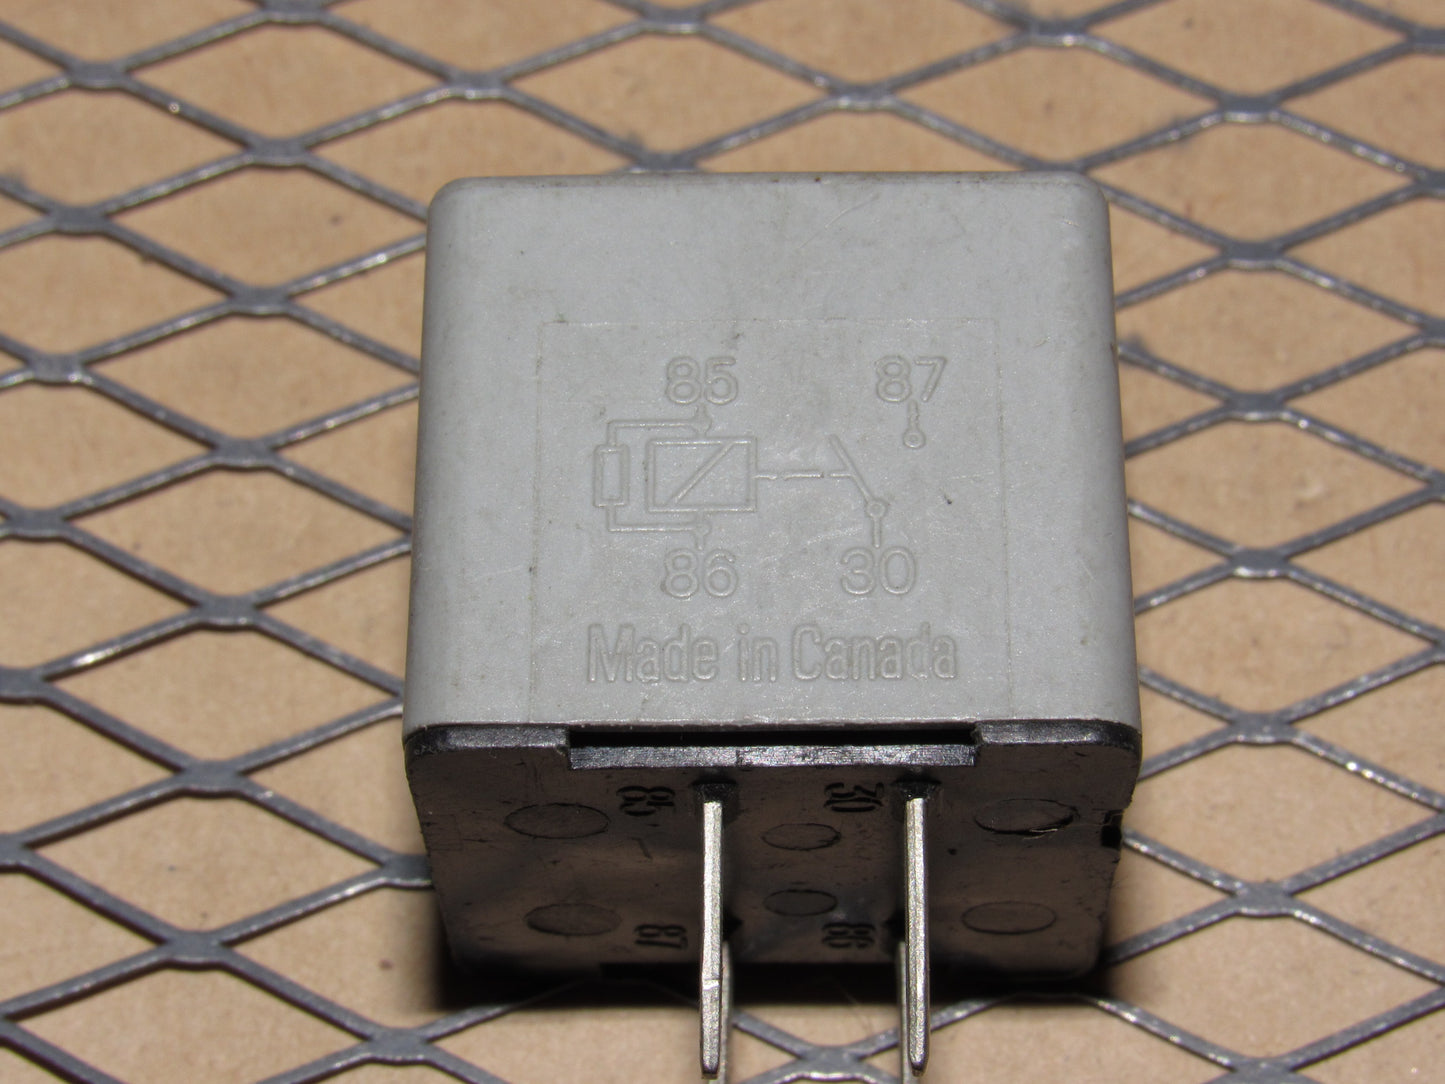 GM Relay 12135034 / GM ABS VI